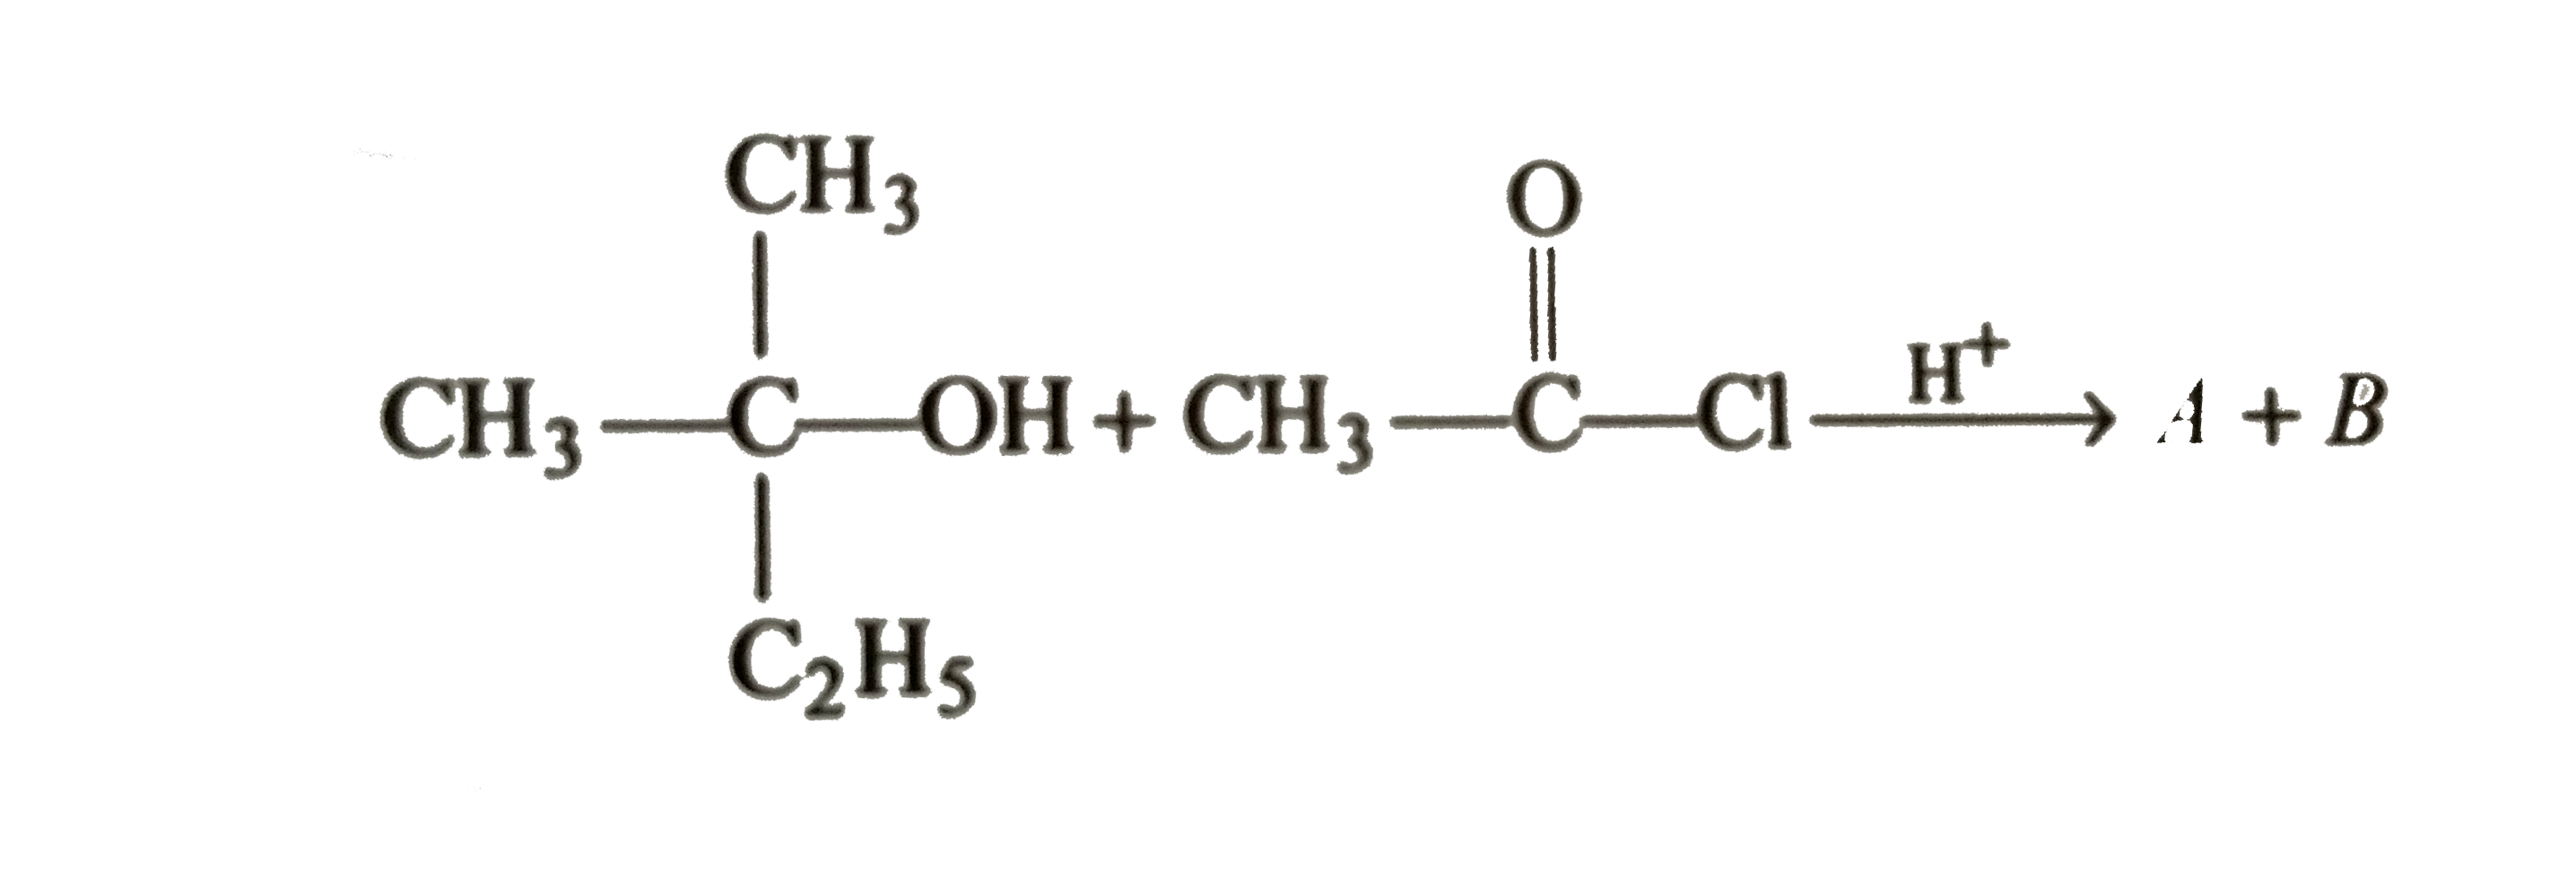 Complete the following reaction and give its mechanism in short :